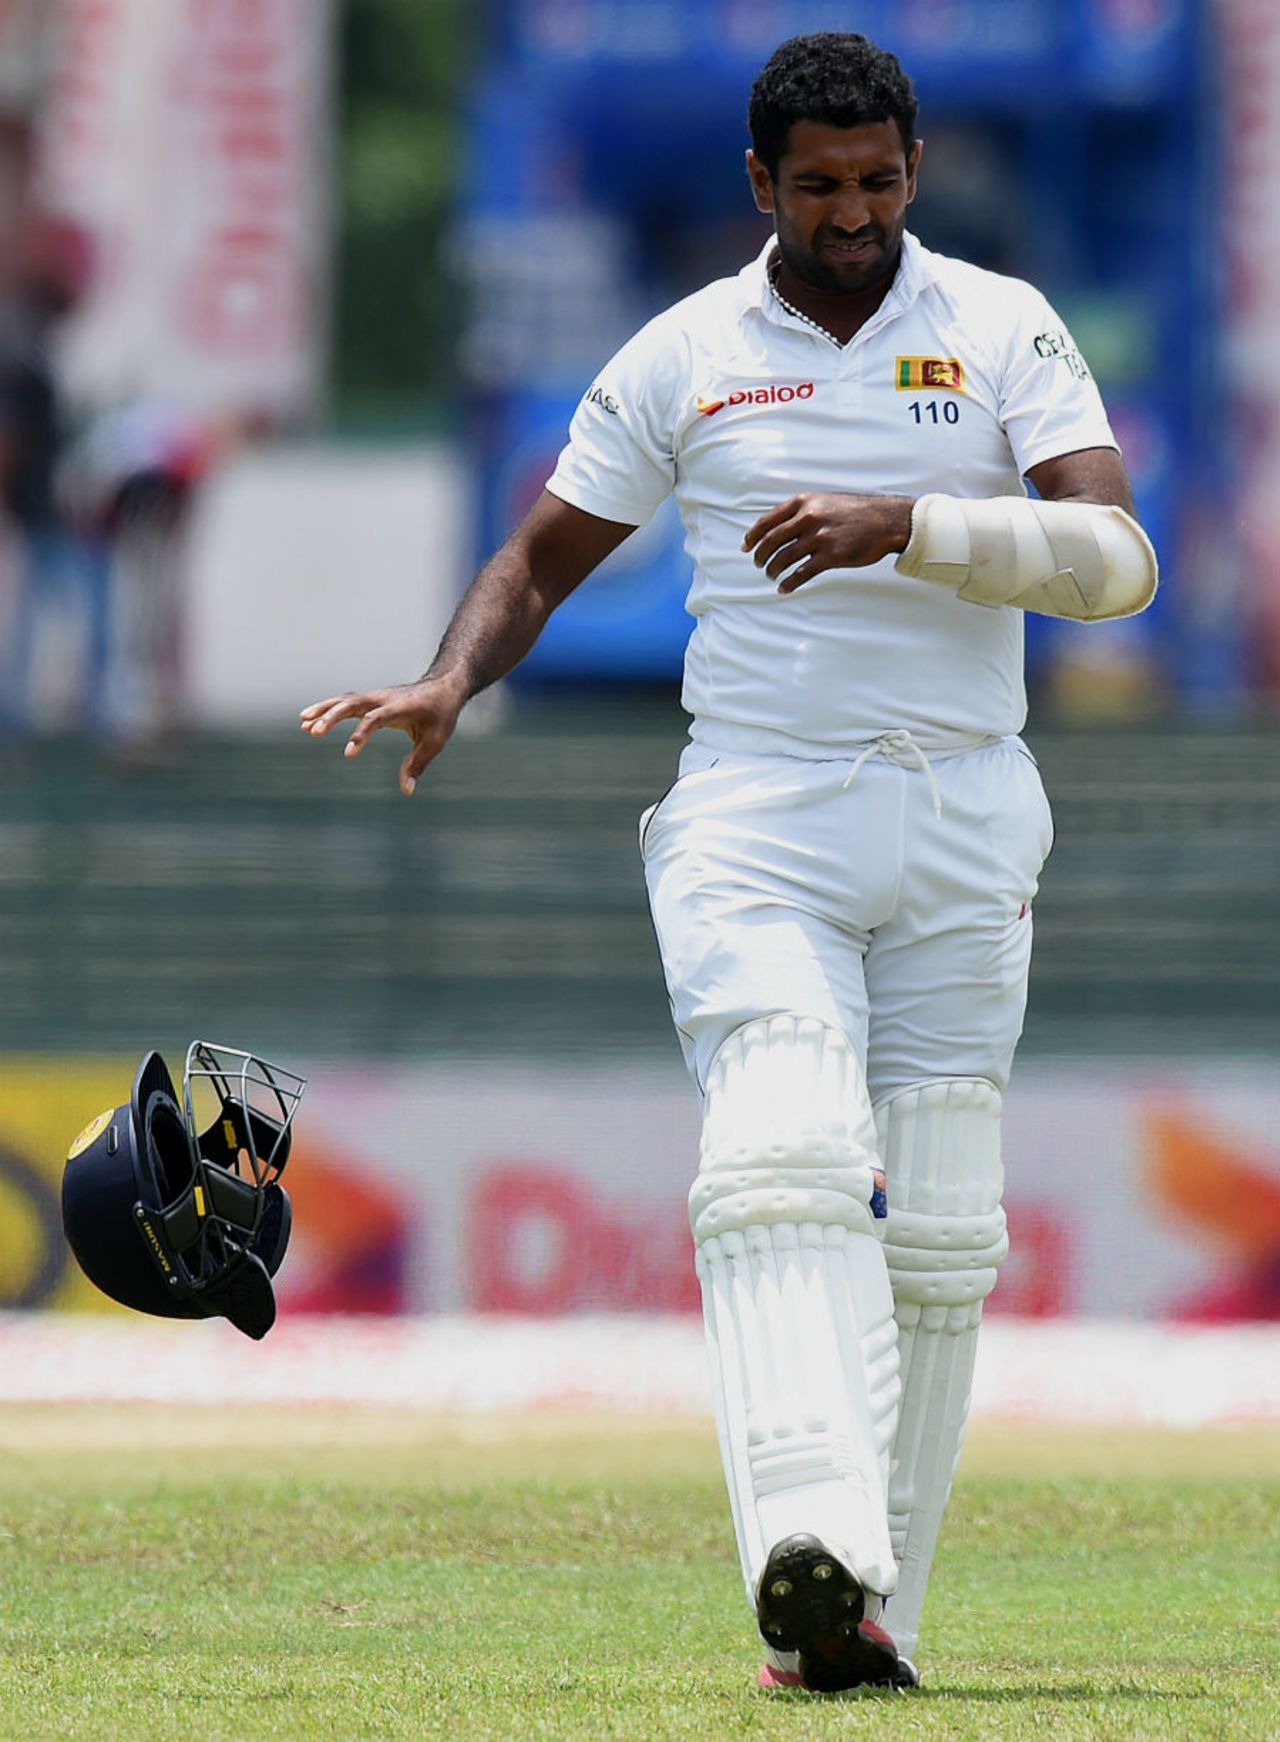 Dhammika Prasad winces after being struck on his arm, Sri Lanka v India, 3rd Test, SSC, Colombo, 3rd day, August 30, 2015